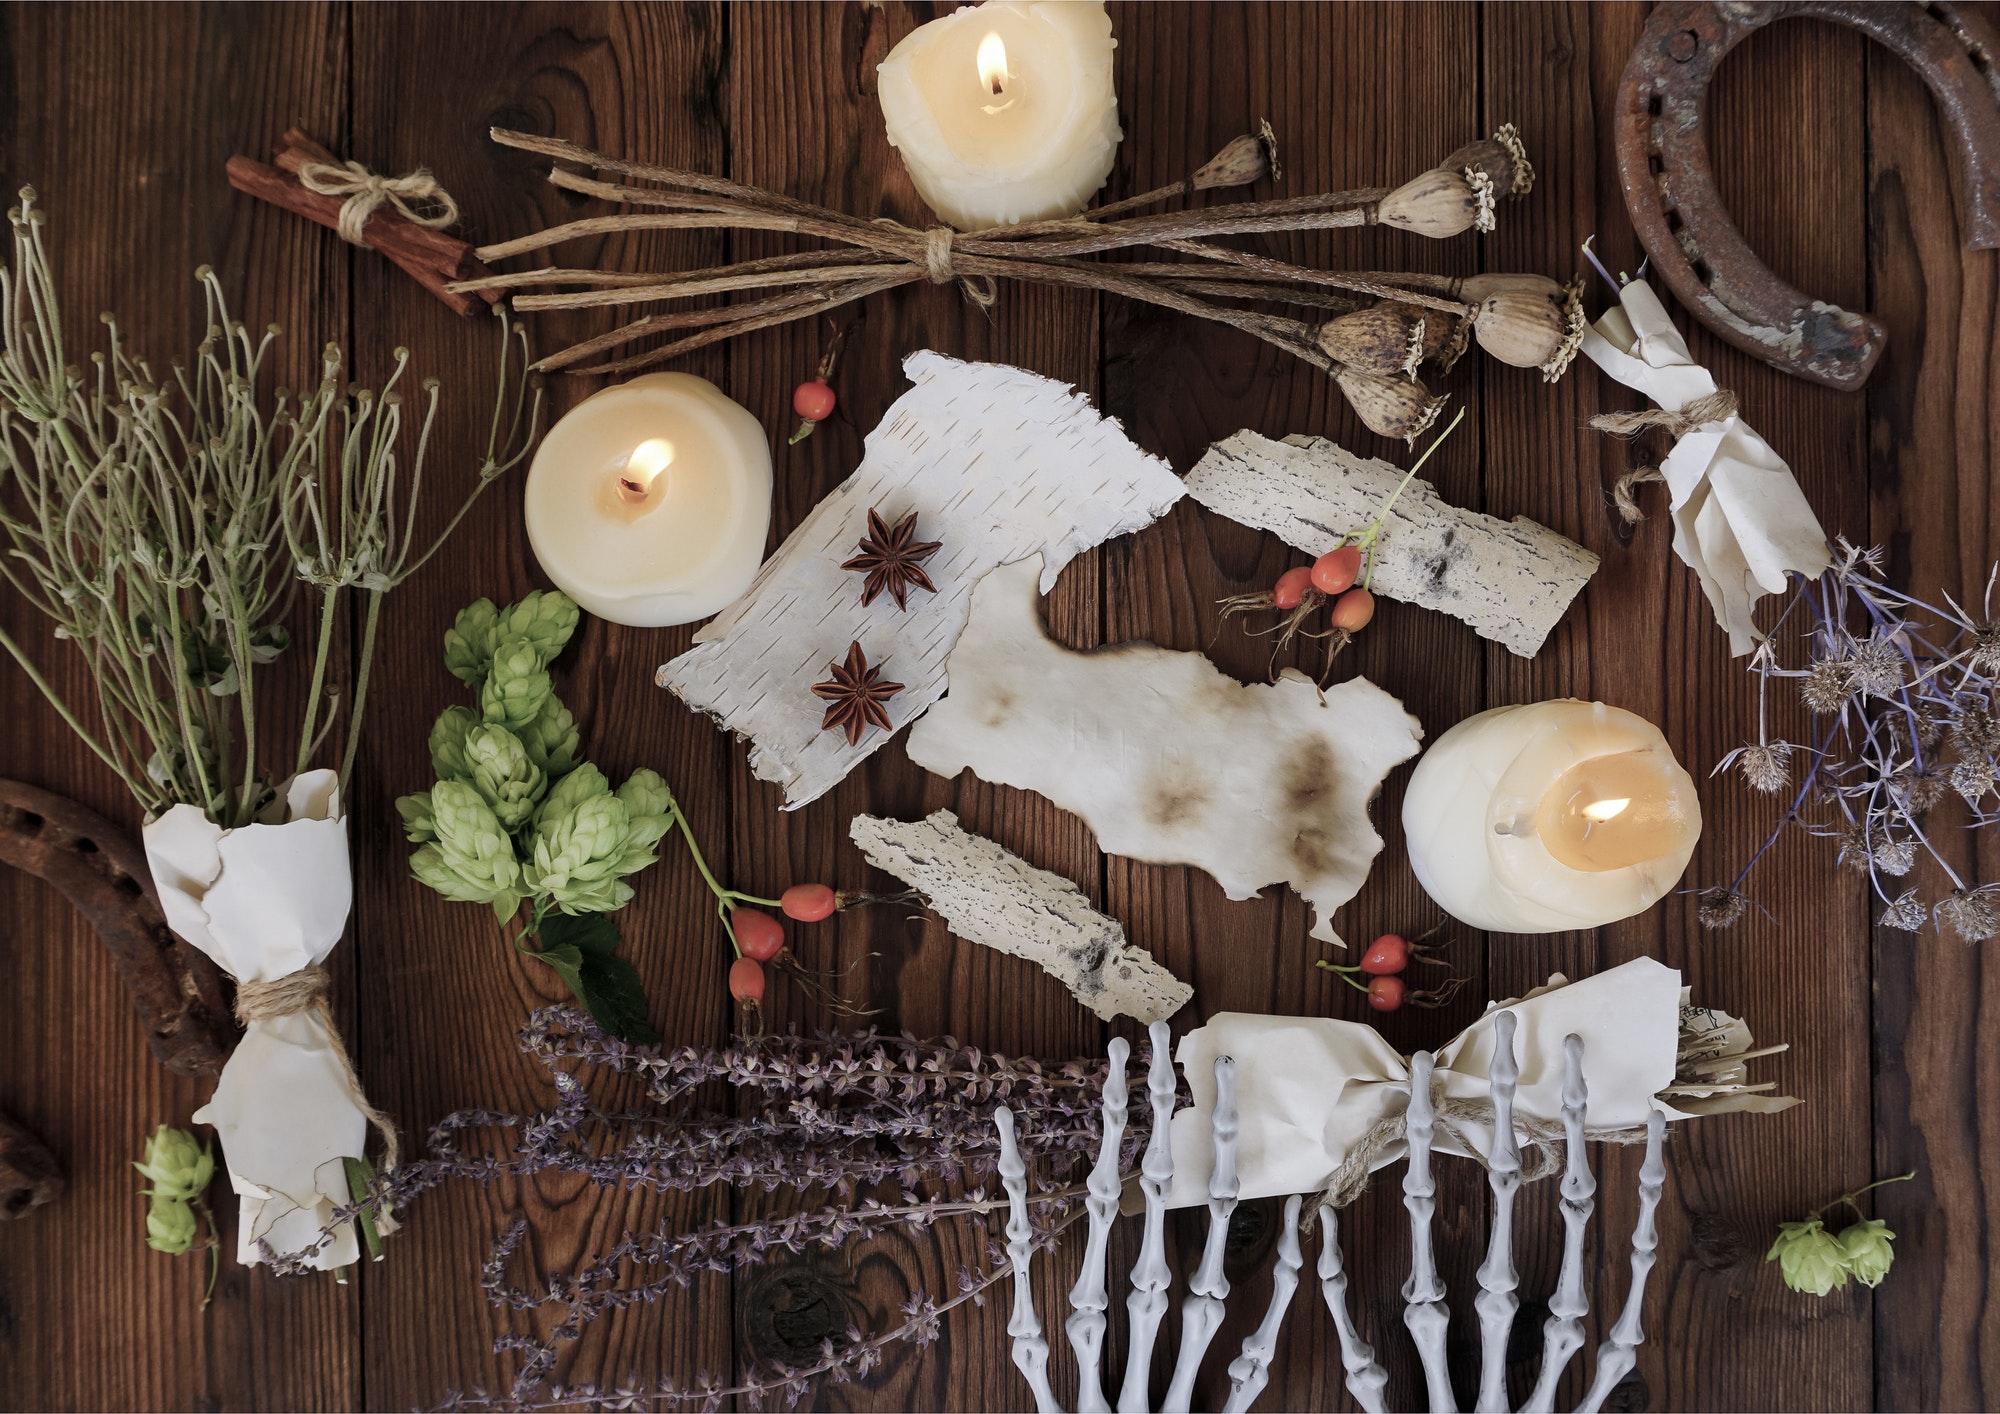 The witch performs a ritual with medicinal herbs and candles